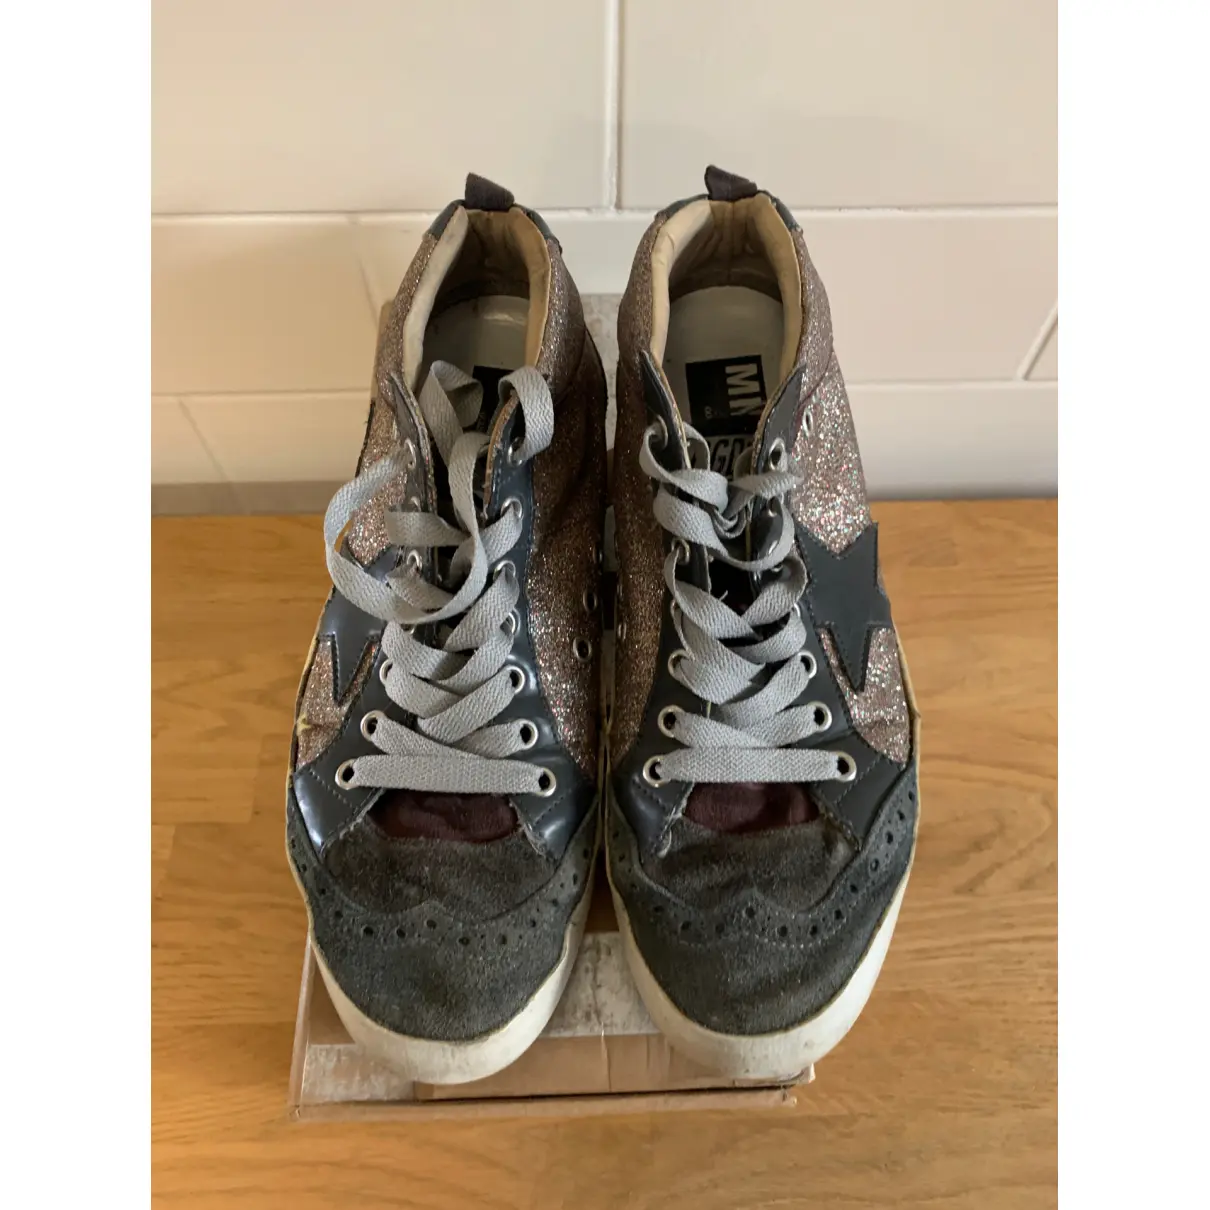 Buy Golden Goose Mid Star leather trainers online